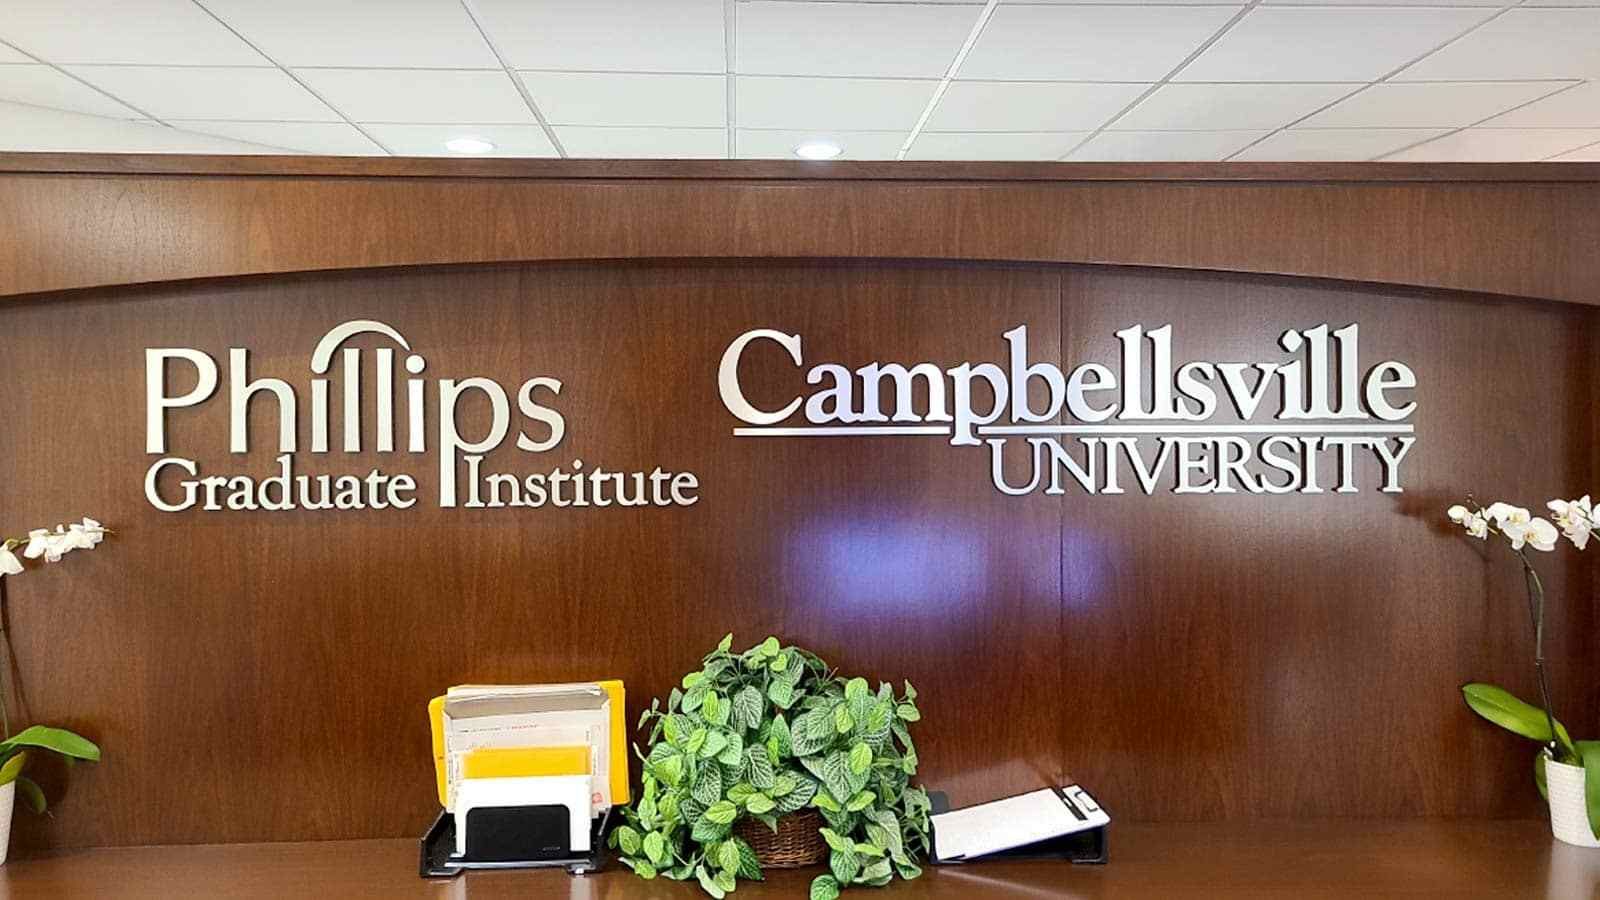 Phillips Education Center 3D signs attached to the wall